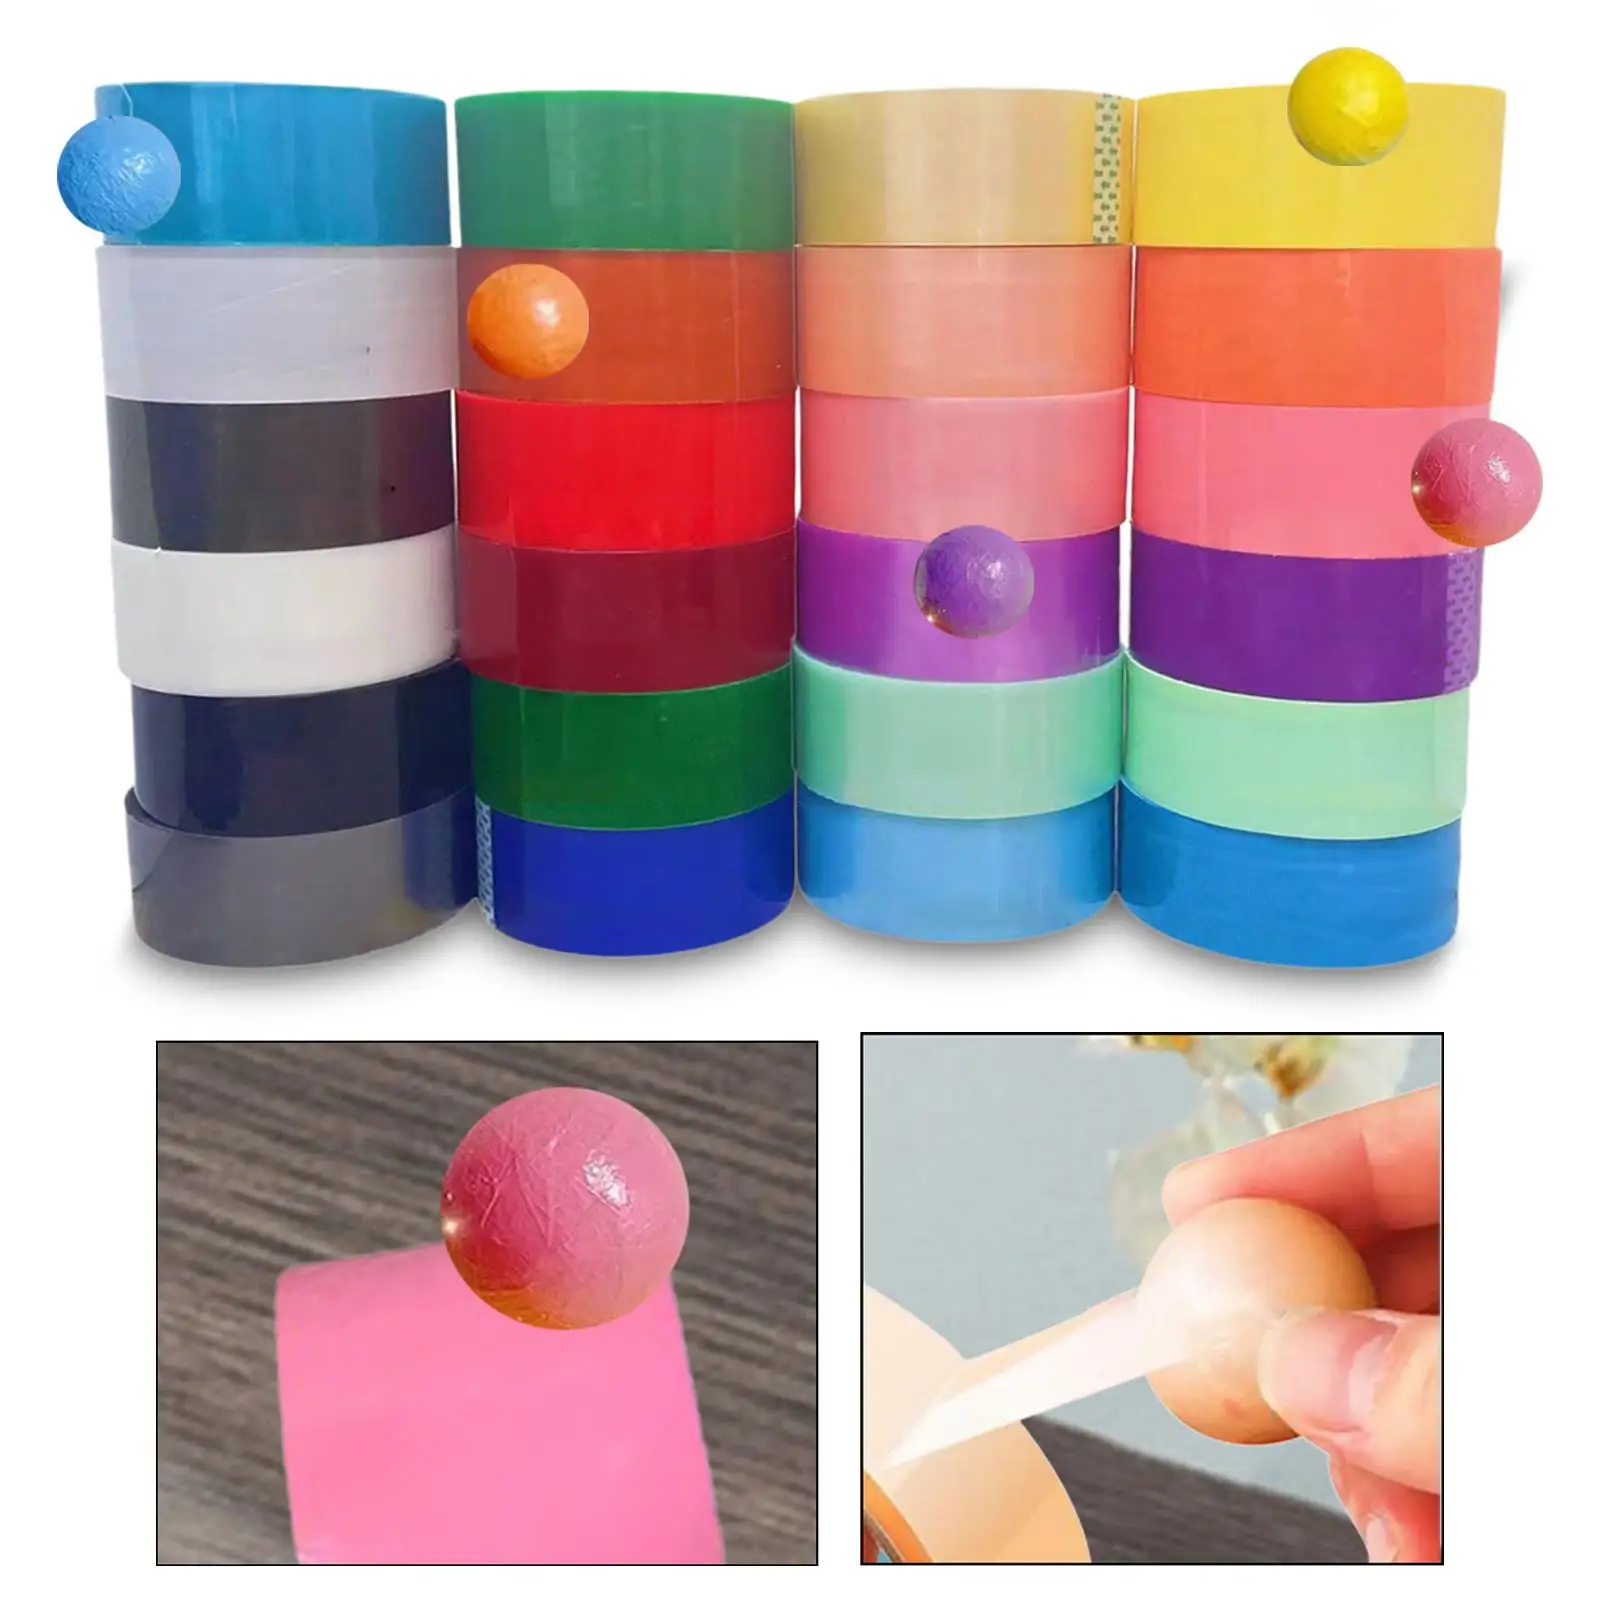 24 Pieces Sticky Ball Rolling Tapes Decompression Toys DIY Making Ball Educational Toy Colored Tapes Bulk for Adult Party Favors